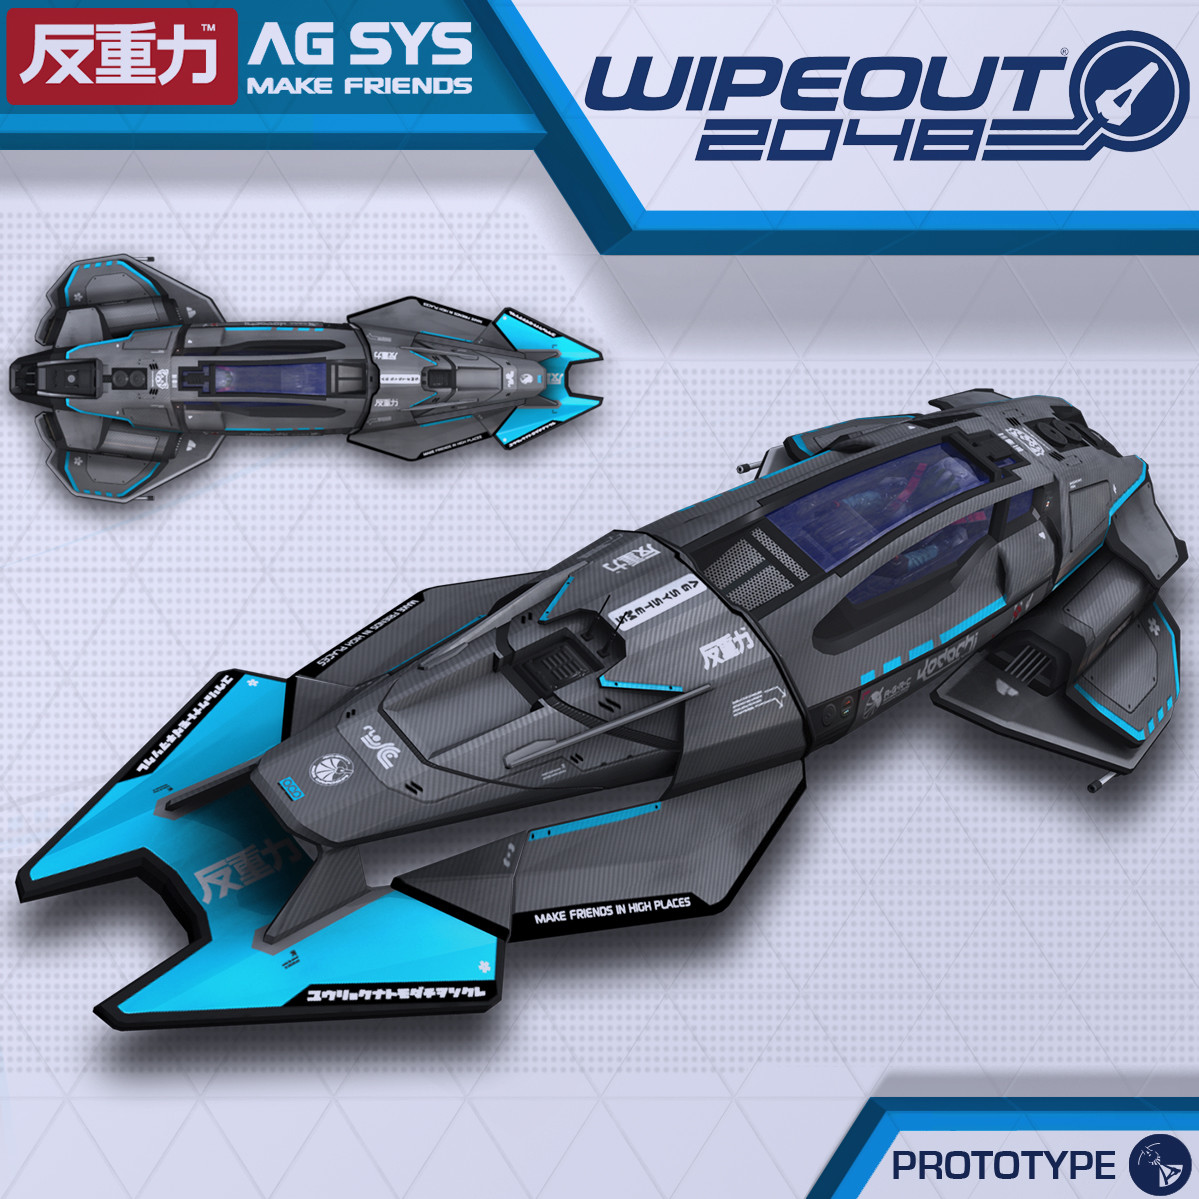 dean-ashley-hr-wipeout2048-agsystems-prototype-square.jpg